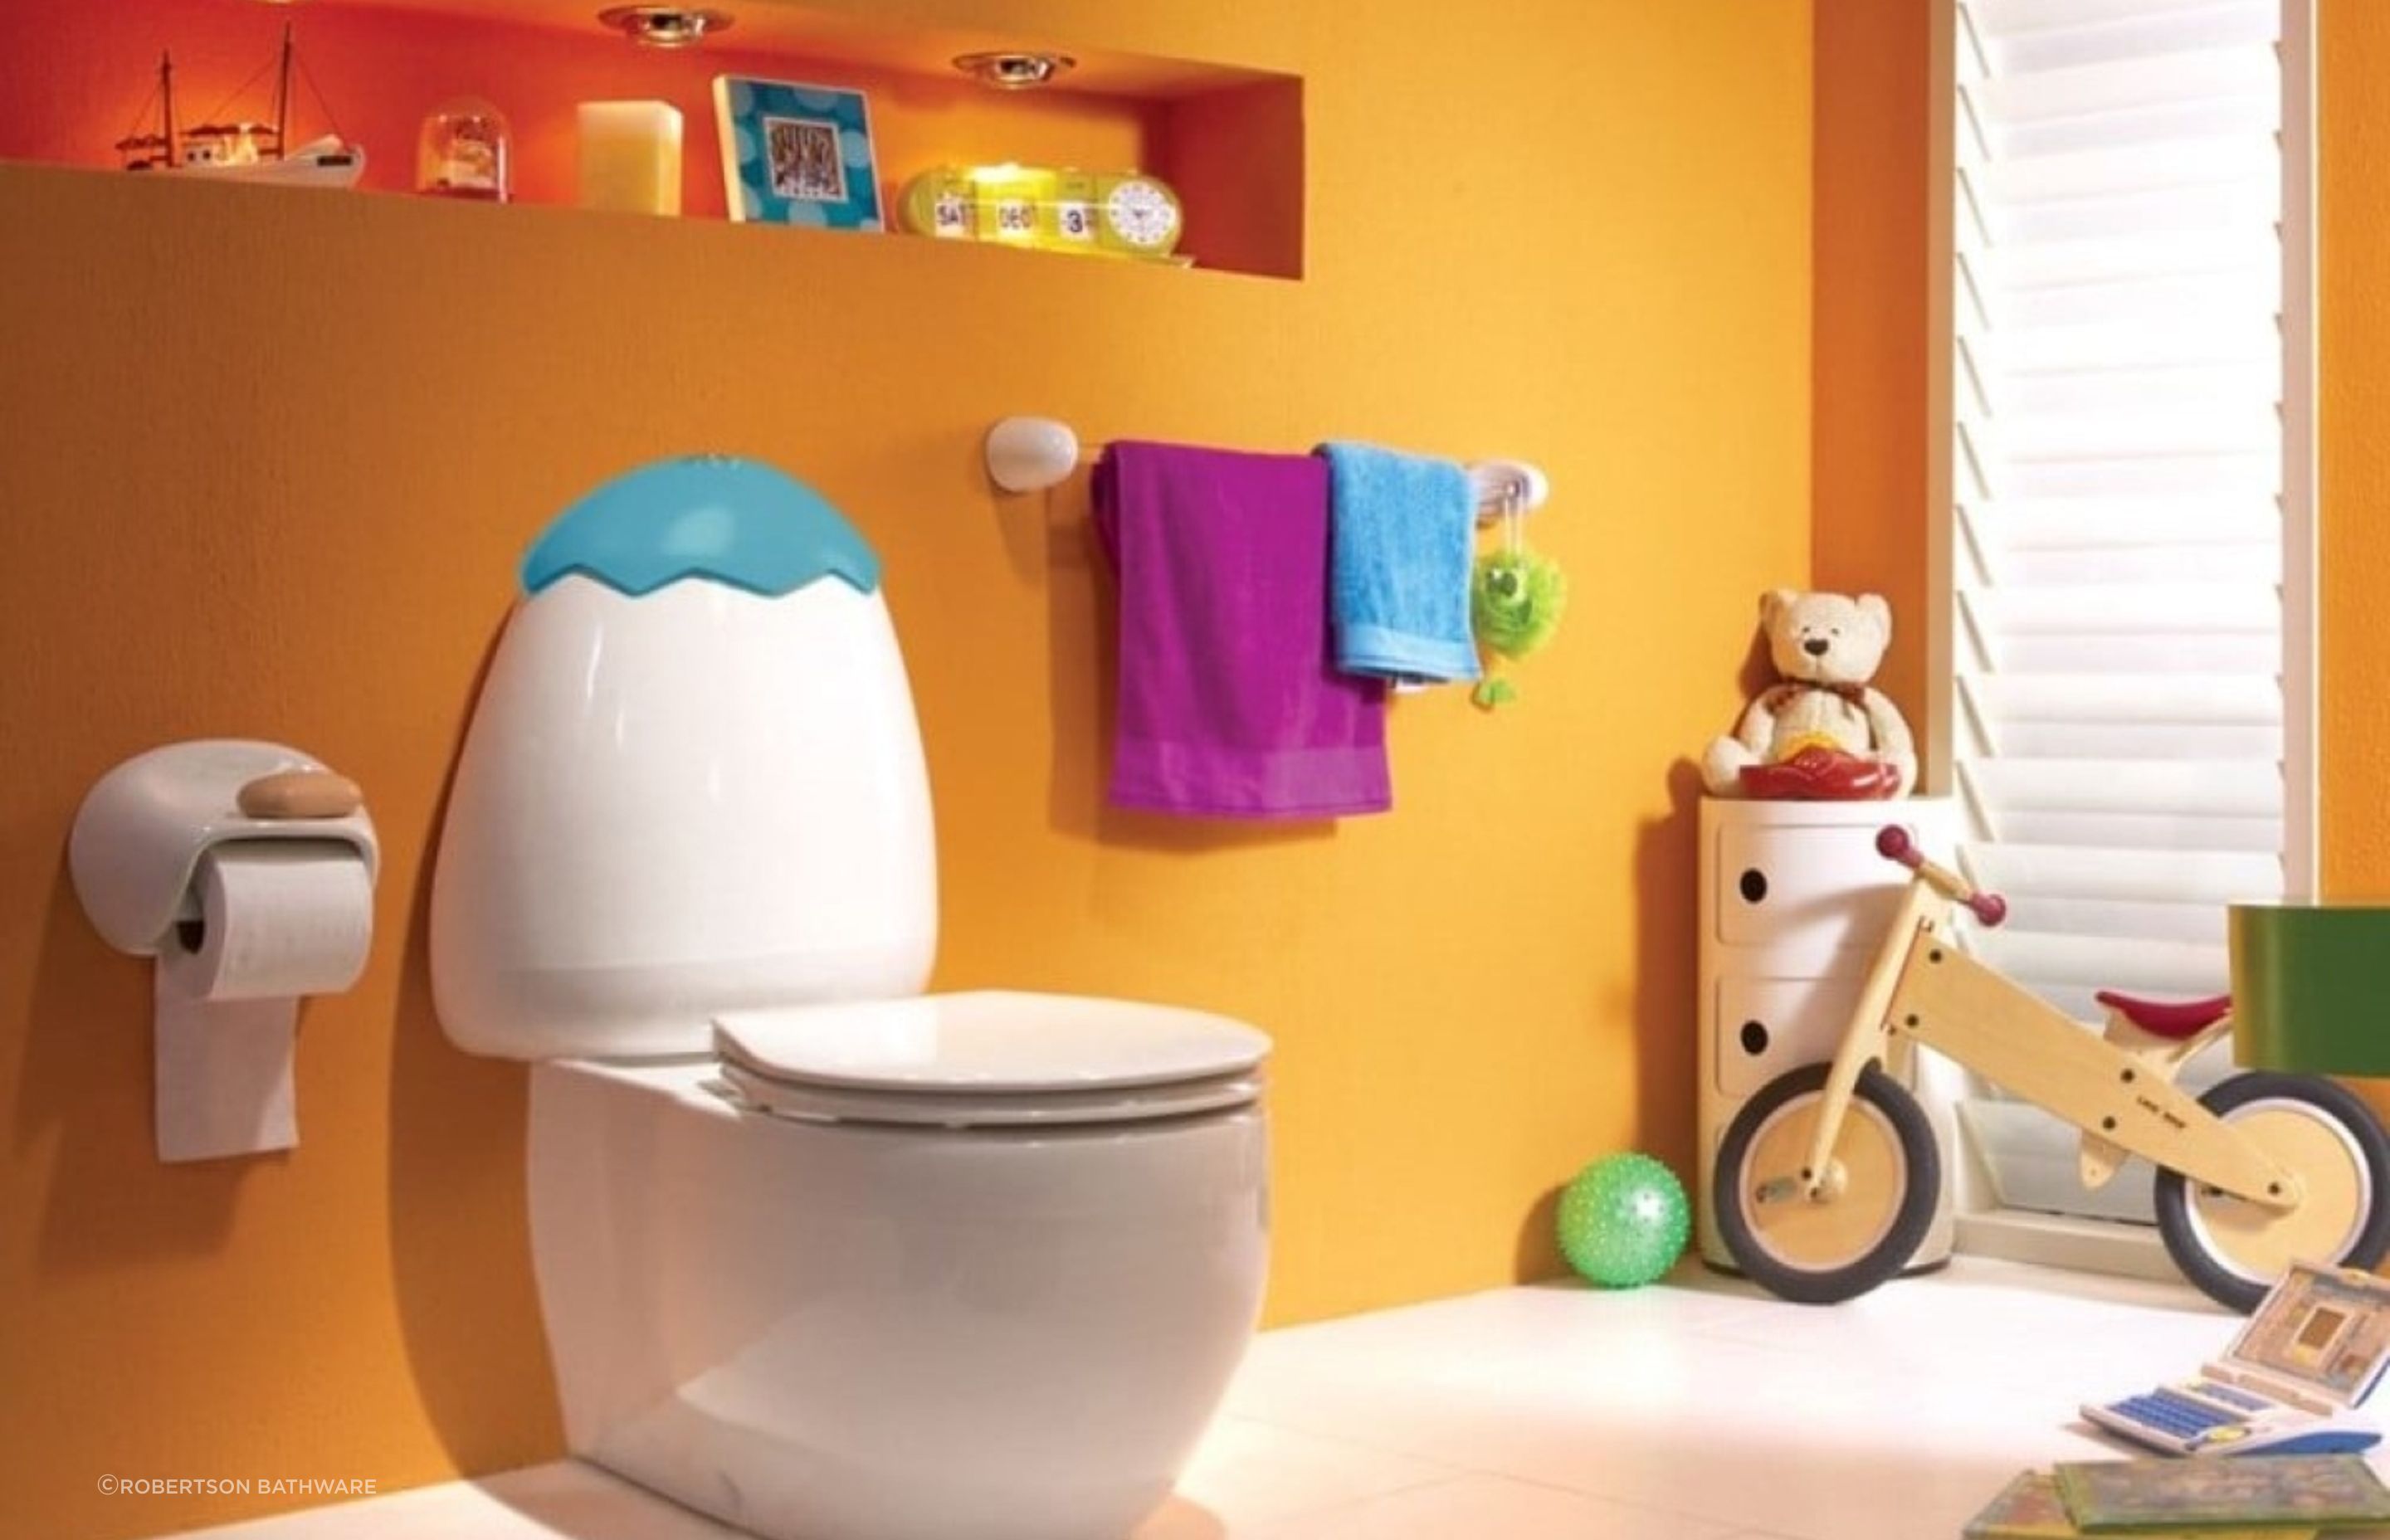 The Googai Junior Toilet is a fun and friendly choice for a kid's bathroom, designed specifically for children between 3-12 years of age.